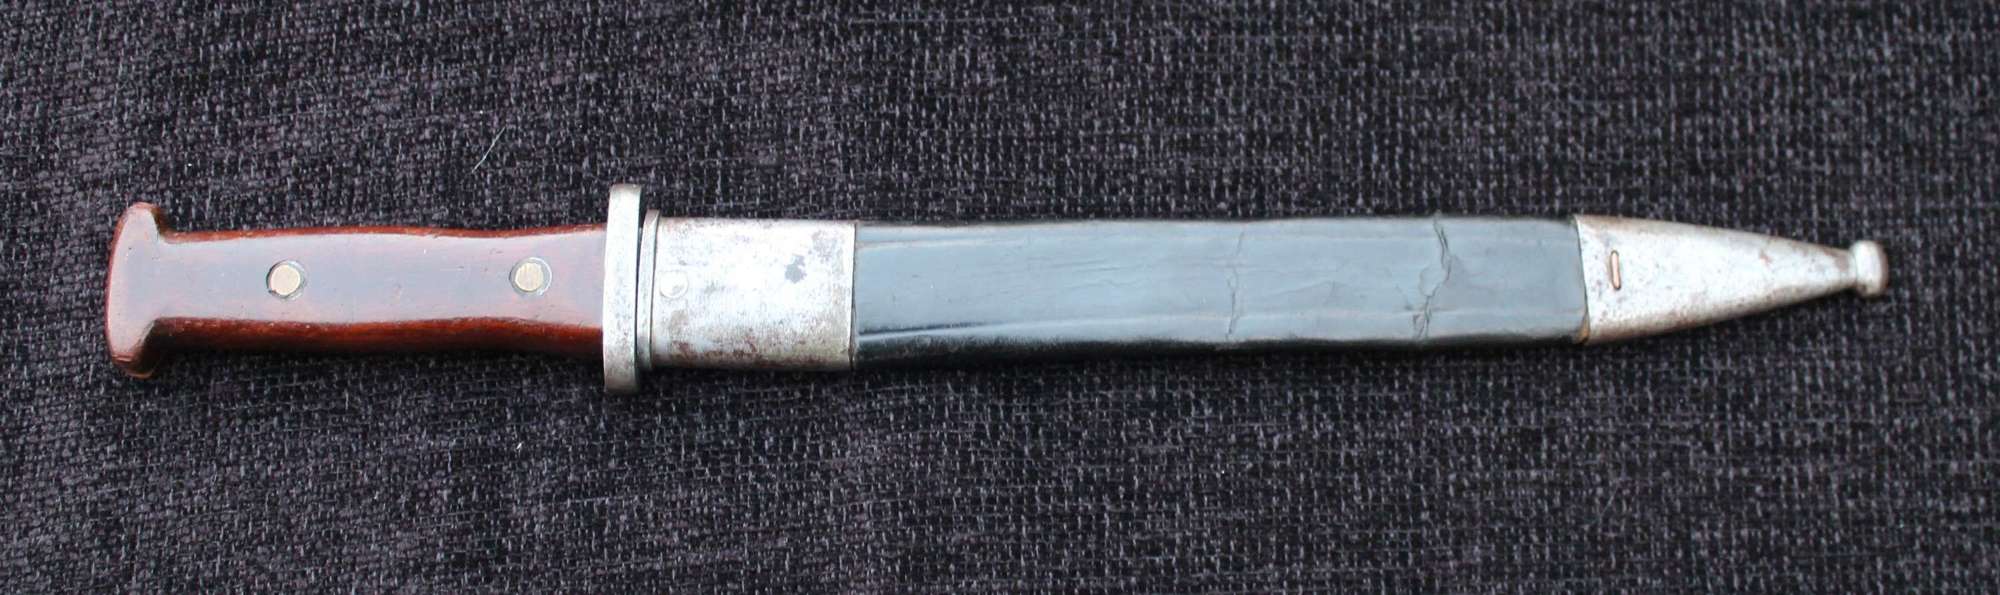 Fighting Knife Conversion